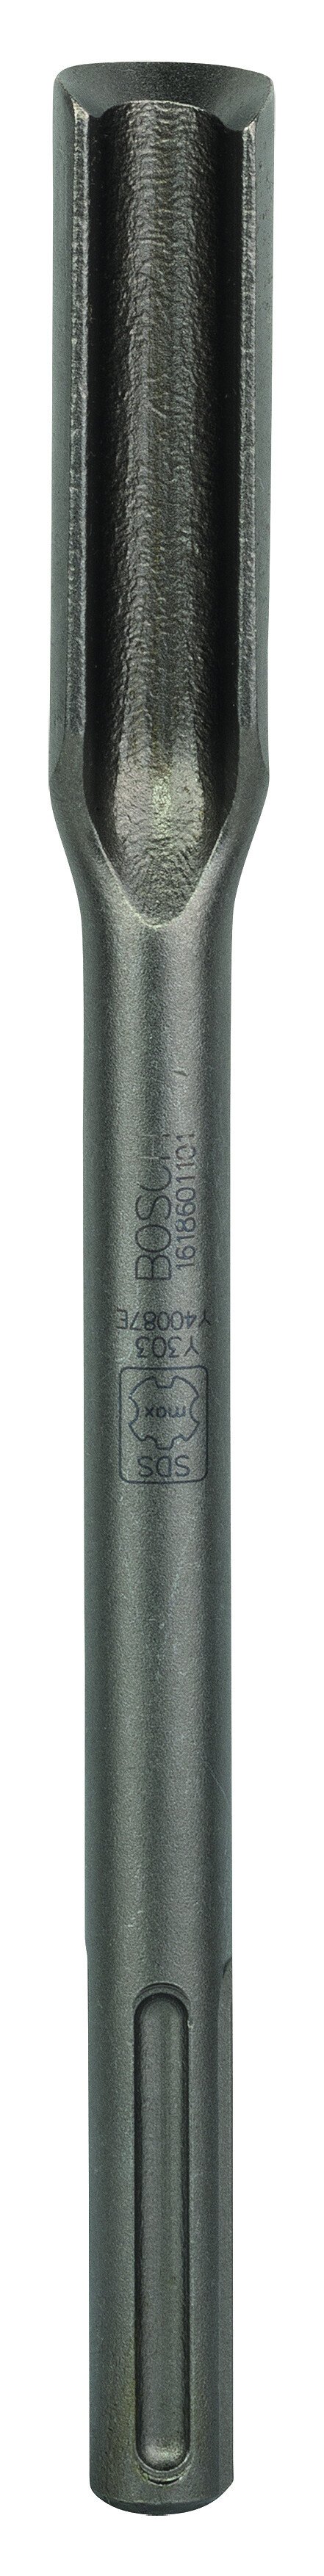 Bosch 1618601101 Chisels SDS-max (for heavy rotary hammers and breakers). Gouging chisel ...